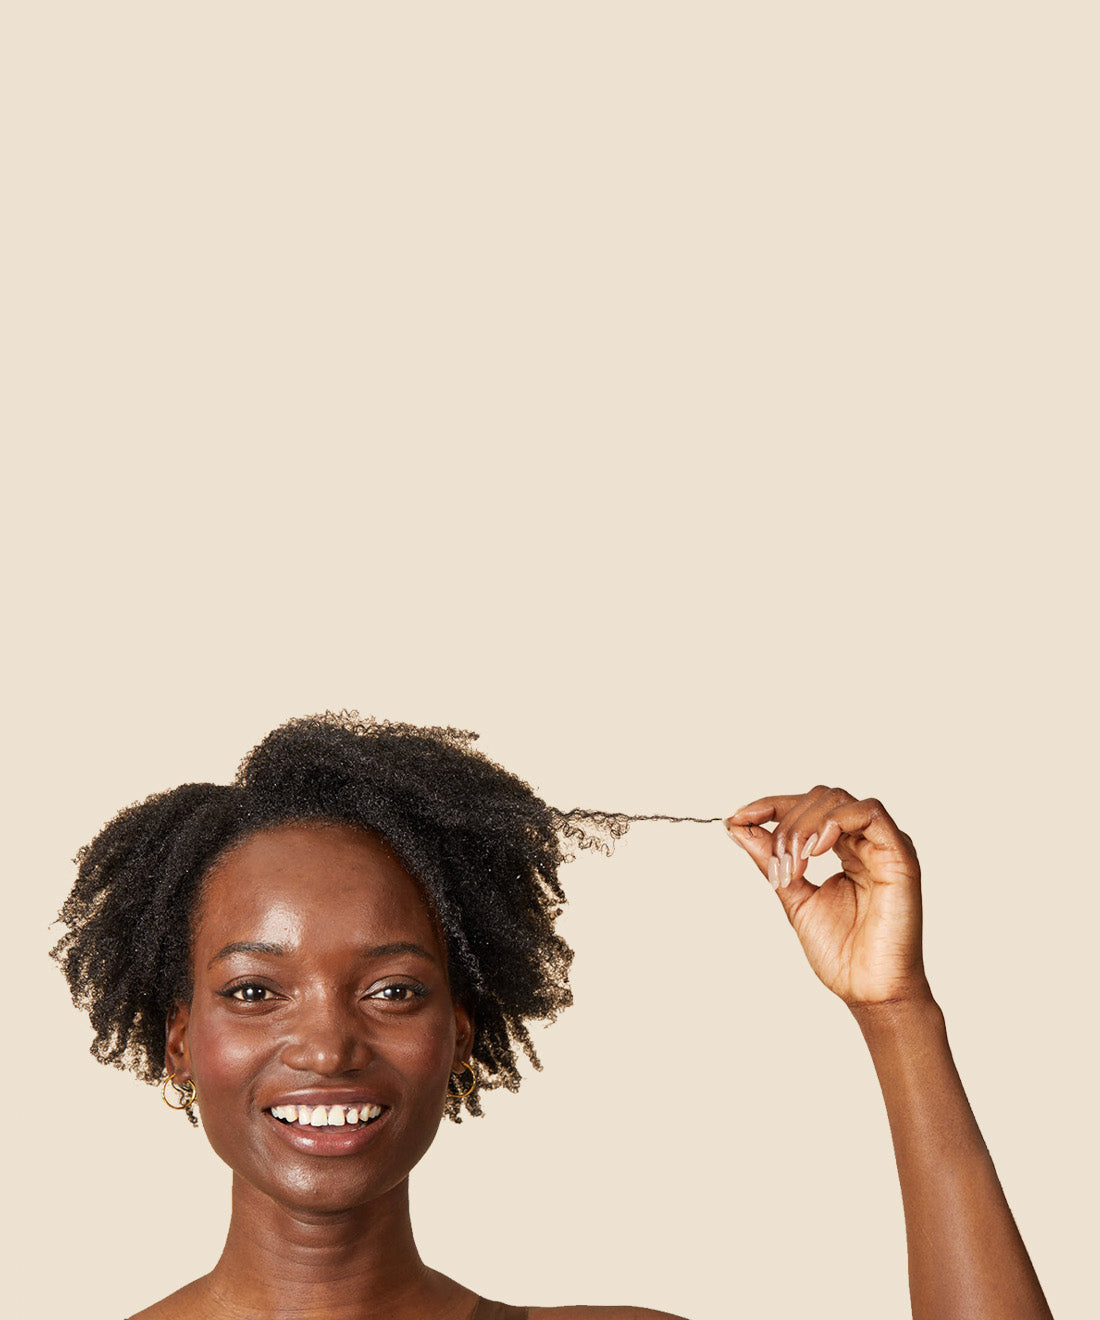 smiling, black woman holding out a few strands of her black, coily hair